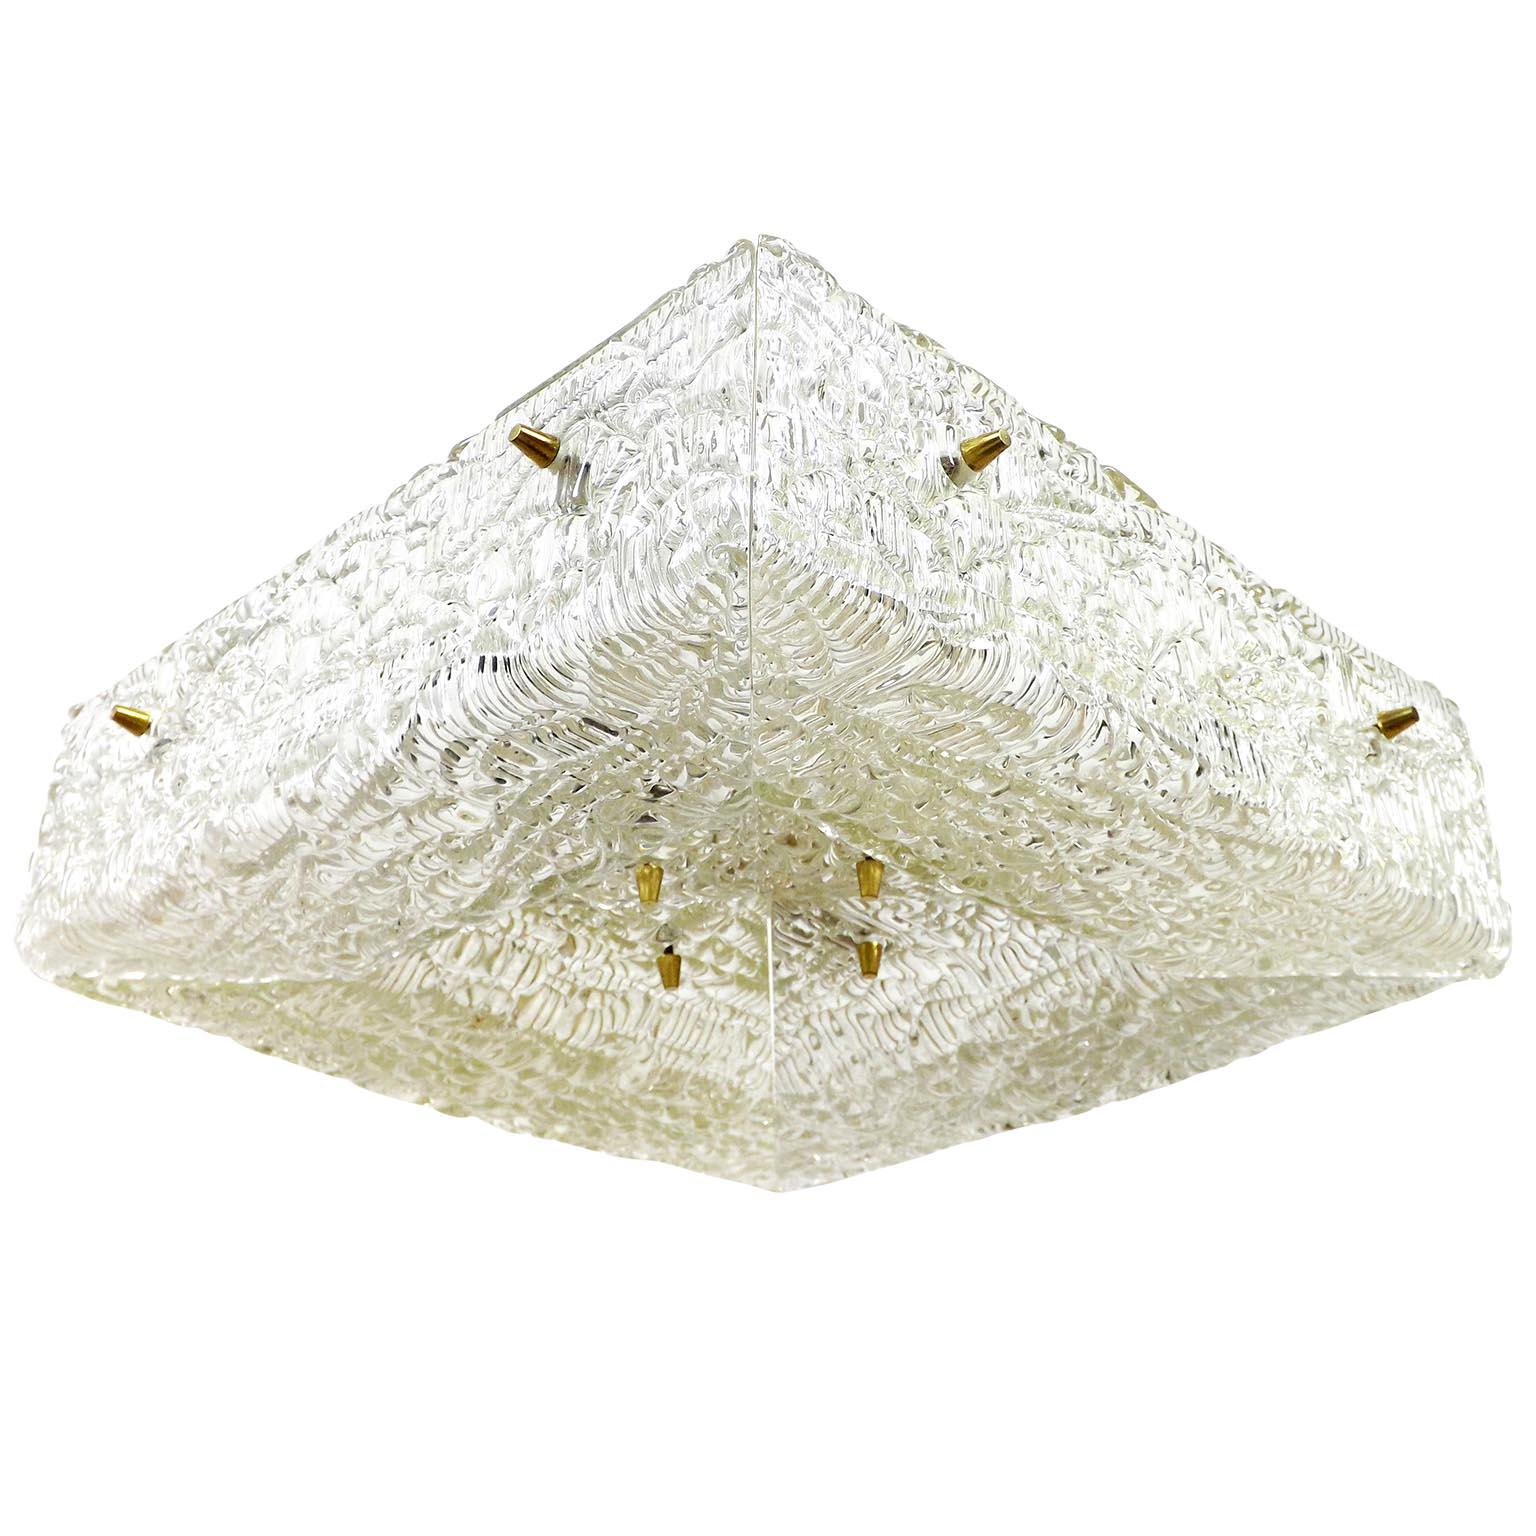 One of six textured glass and brass flush mount lights by J.T. Kalmar, Austria, manufactured in midcentury, circa 1960 (late 1950s or early 1960s).
A square pressed glass with a watery structure is divided into four parts which are mounted with